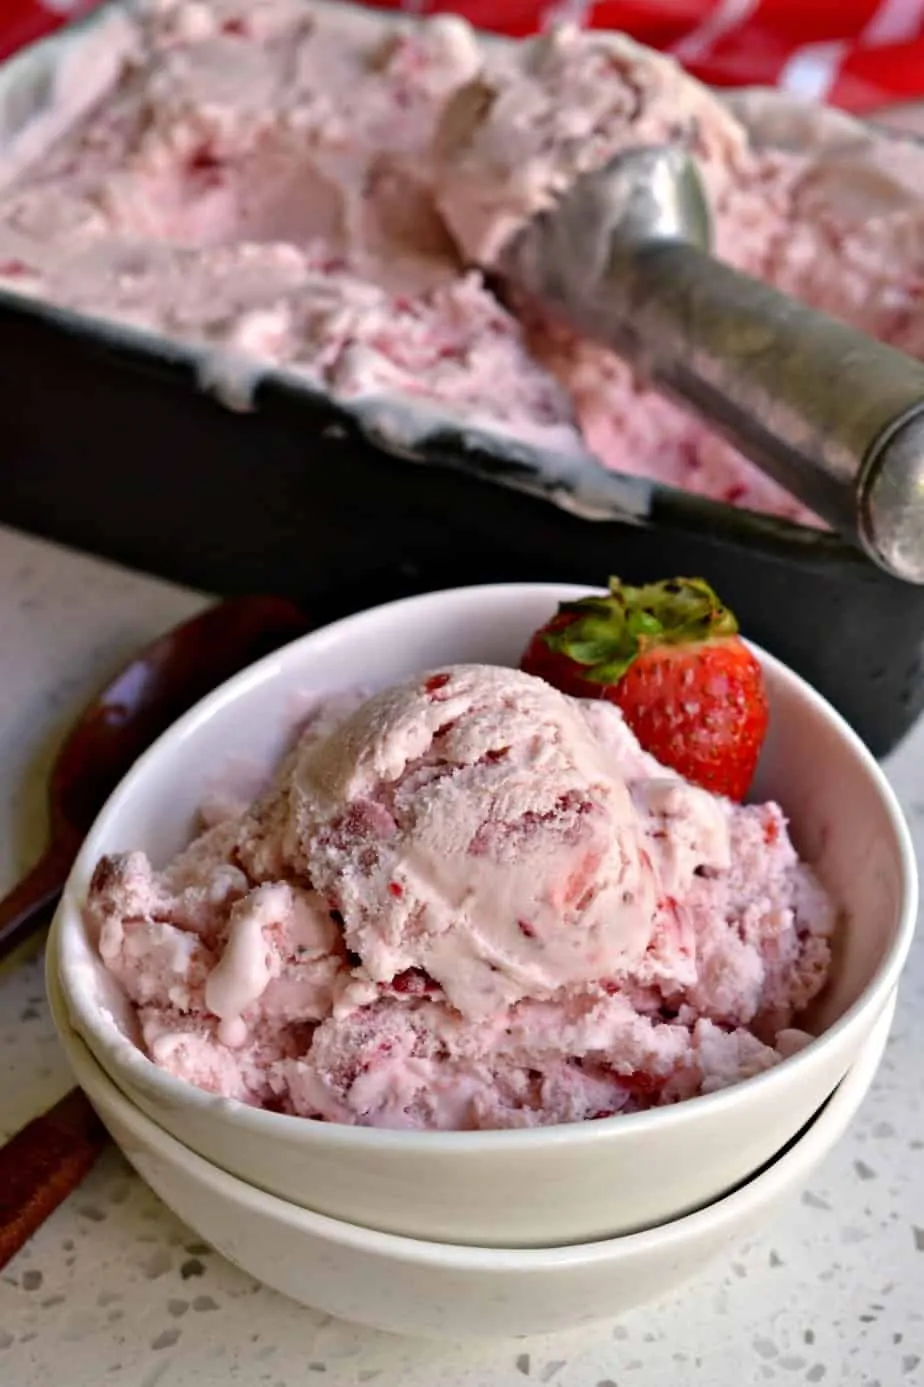 You are going to love the little bits of sweetened smashed strawberries mixed in this Strawberry Ice Cream. 